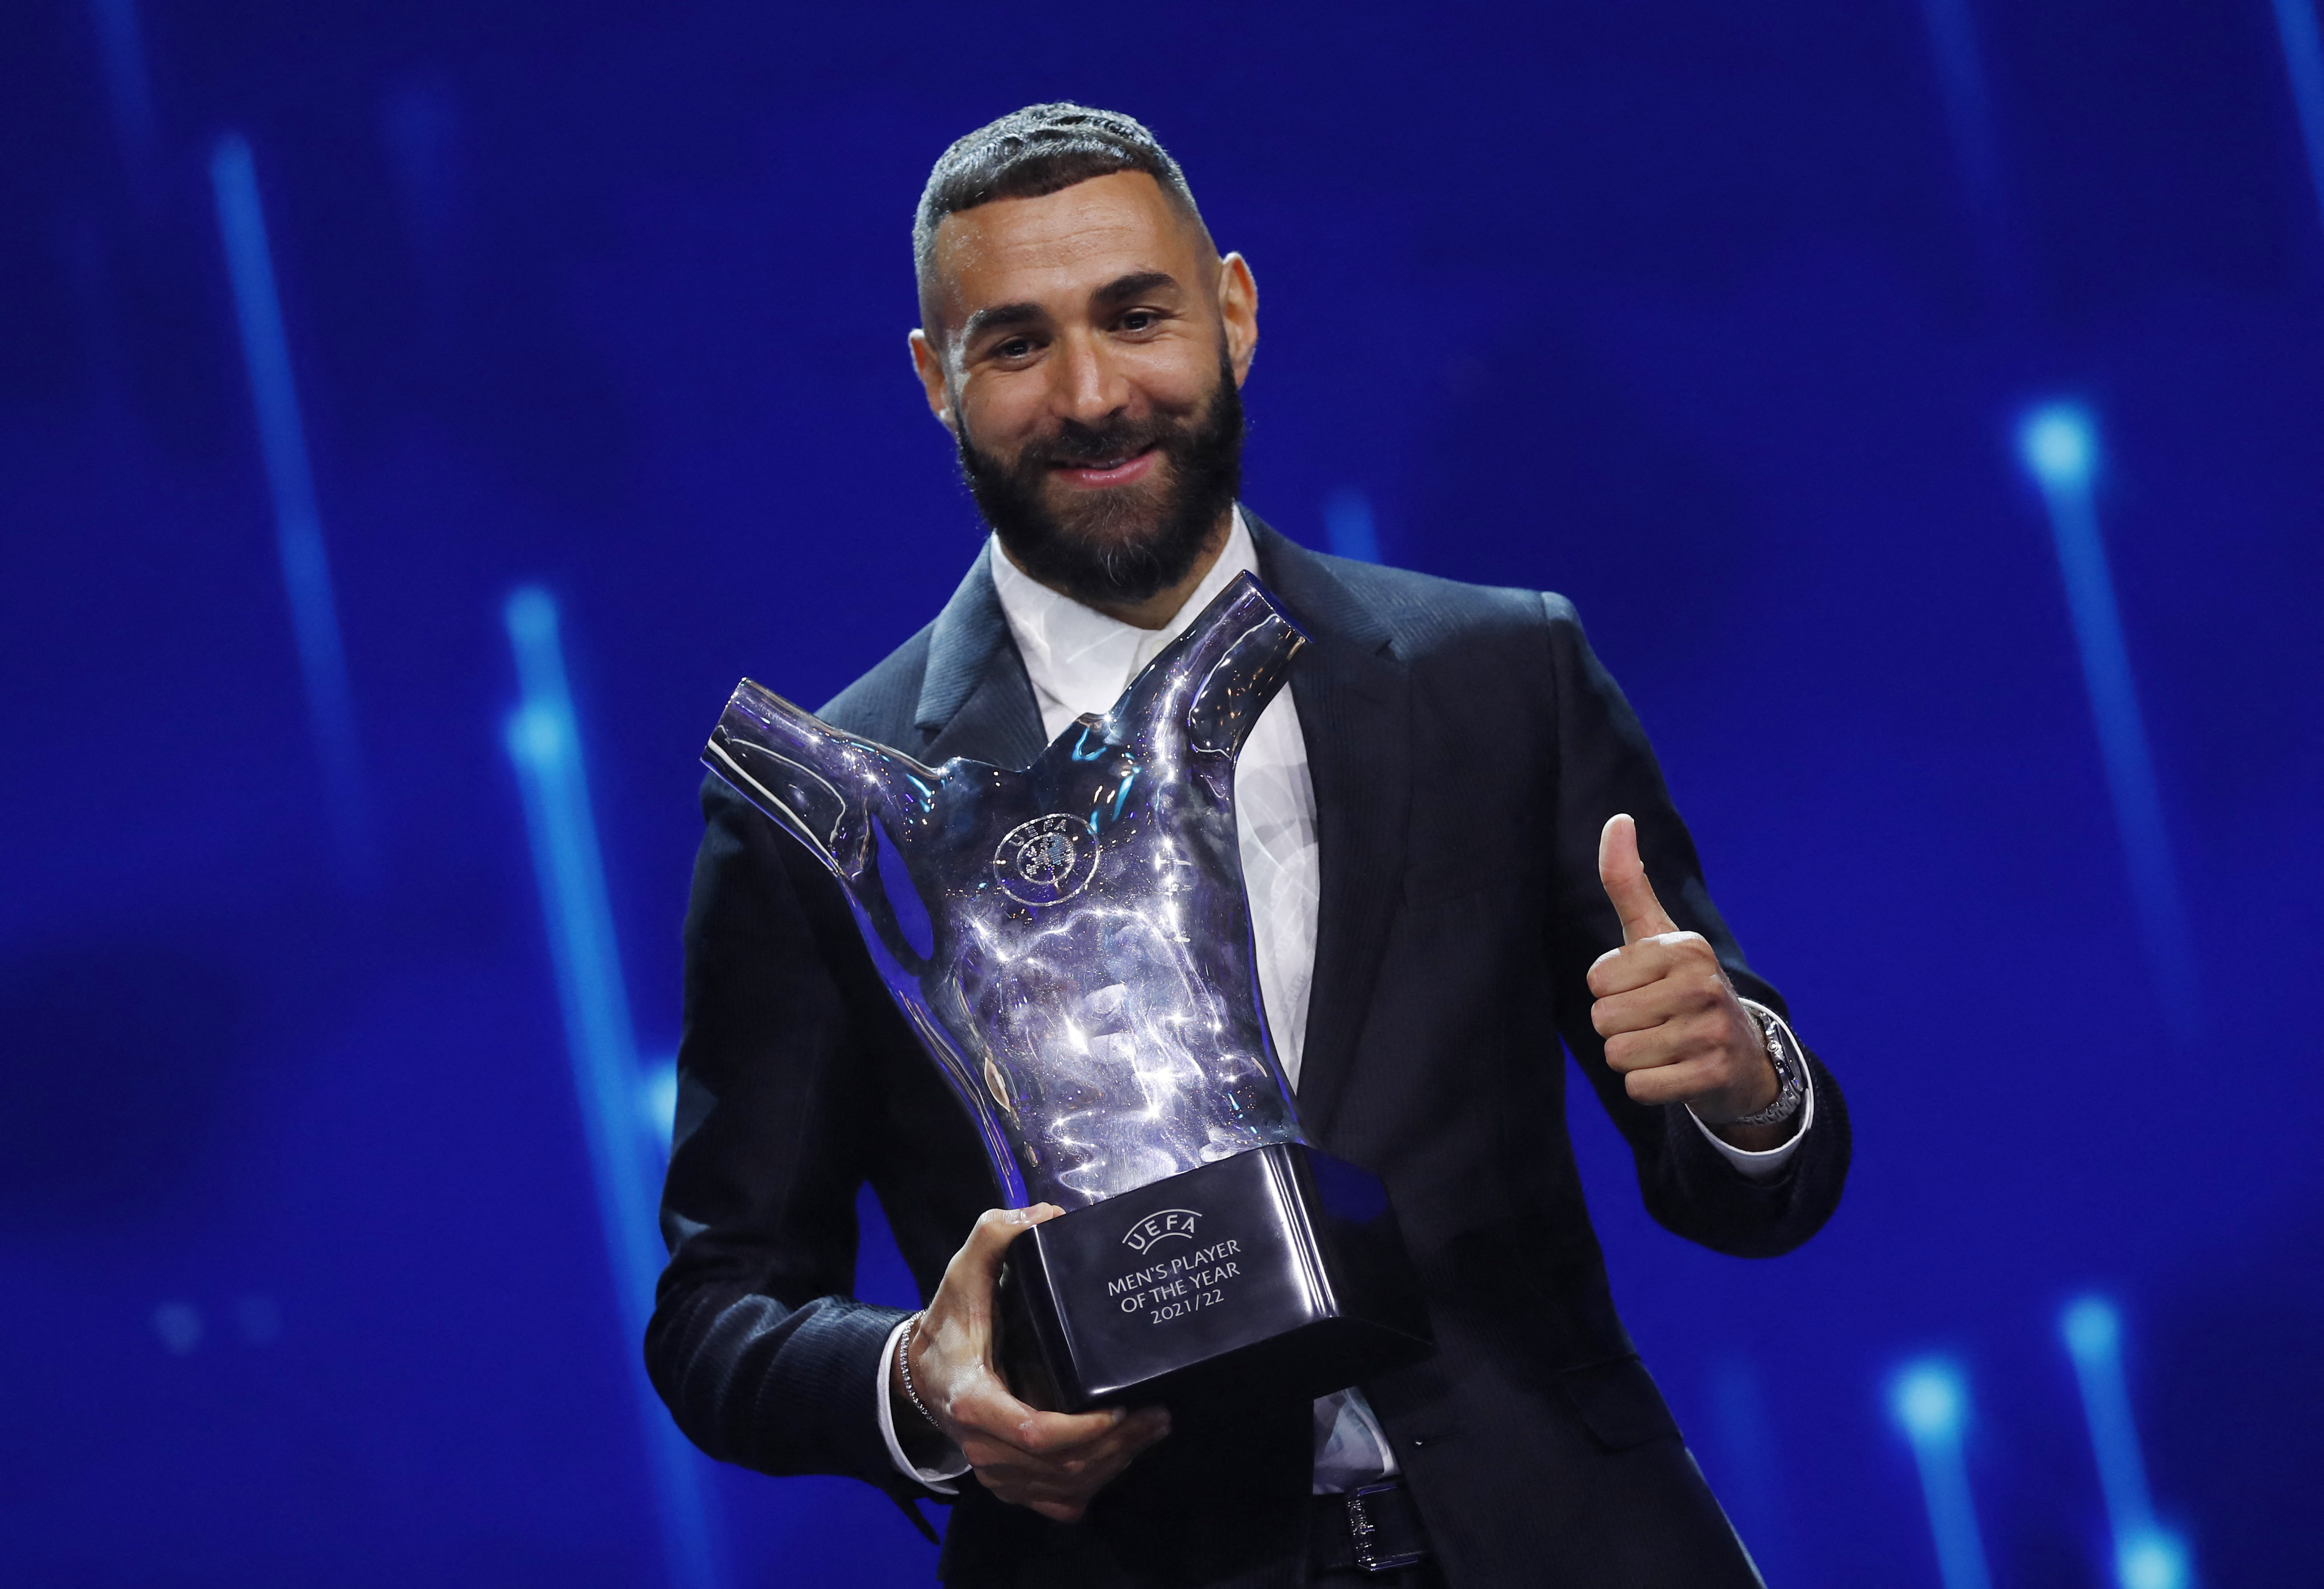 Real's Benzema named UEFA player of year, Ancelotti wins coach's award - Reuters